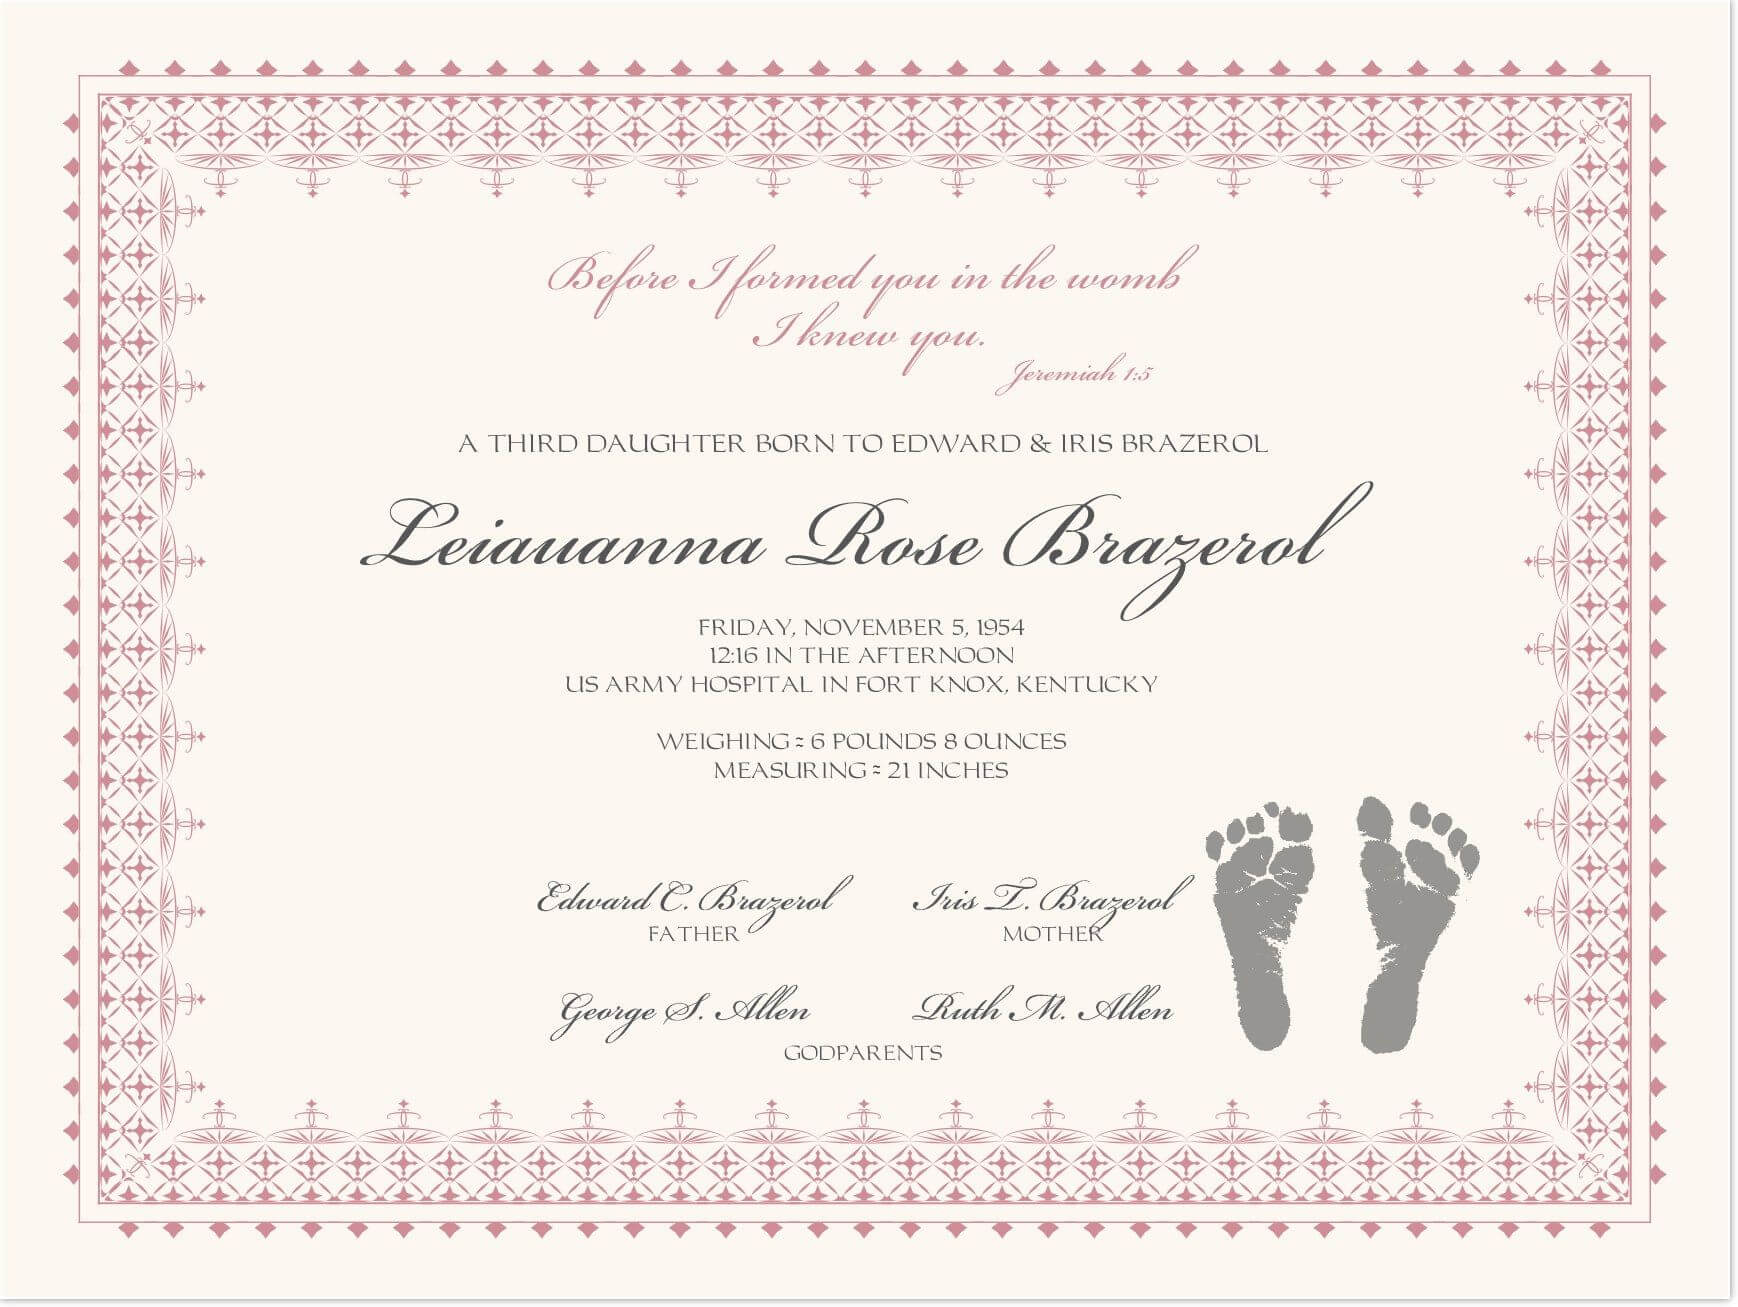 002 Baby Dedication Certificate Template Ideas Wonderful Throughout Girl Birth Certificate Template